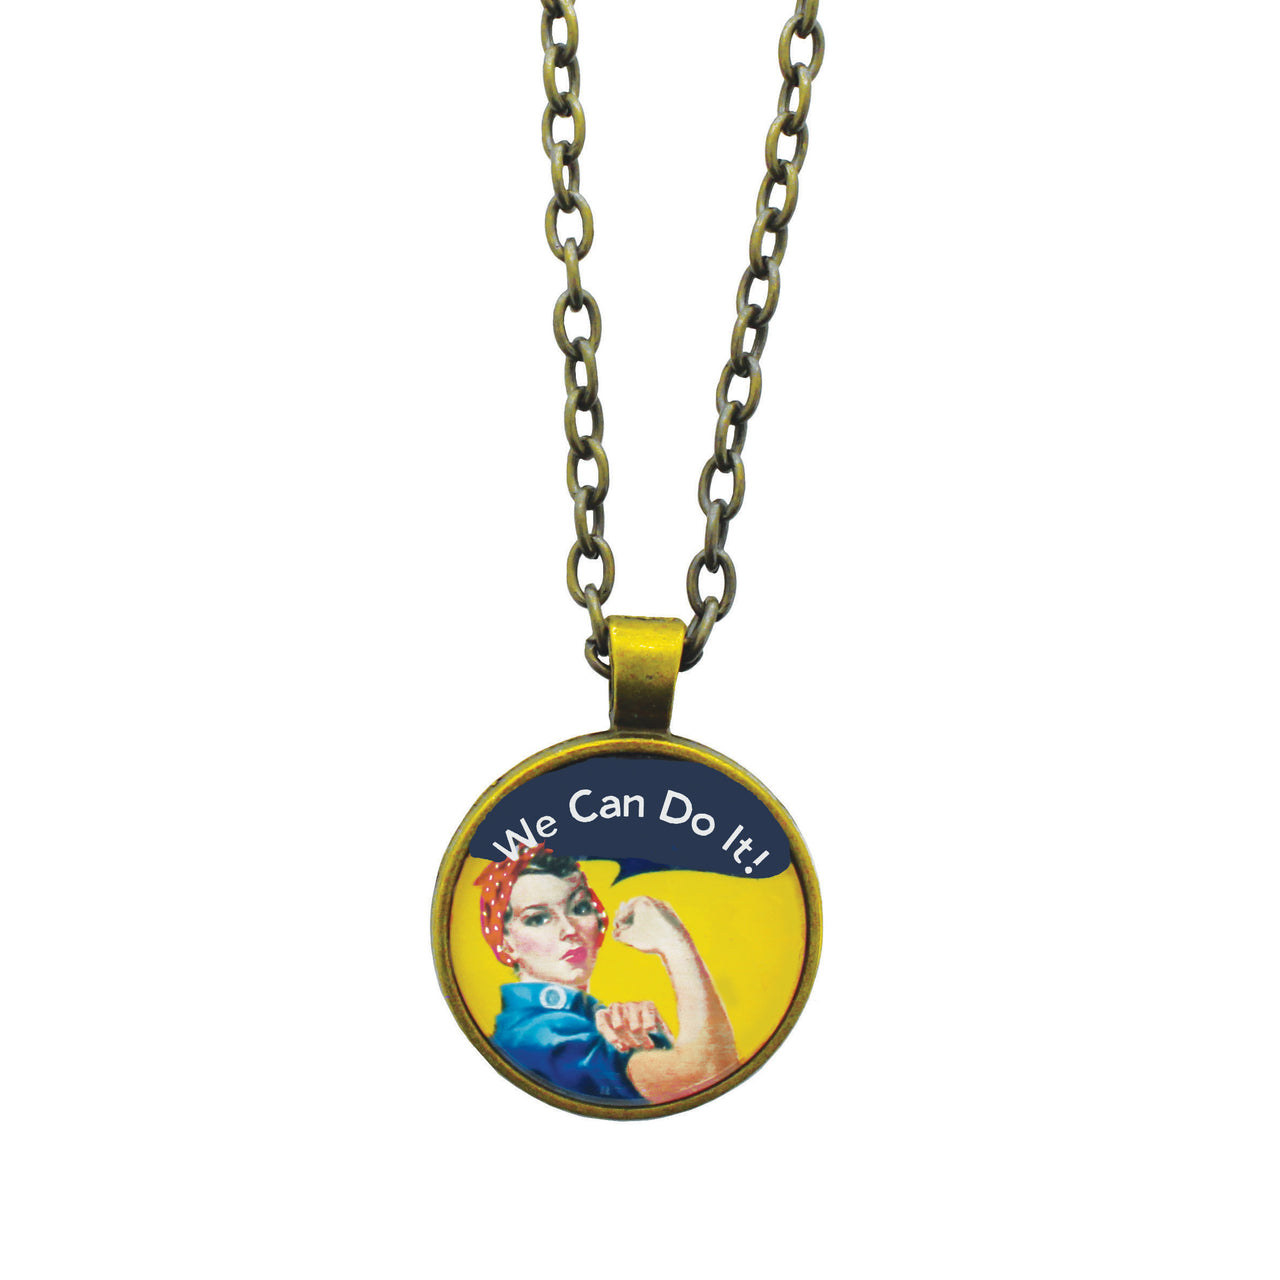 Rosie the Riveter Necklace